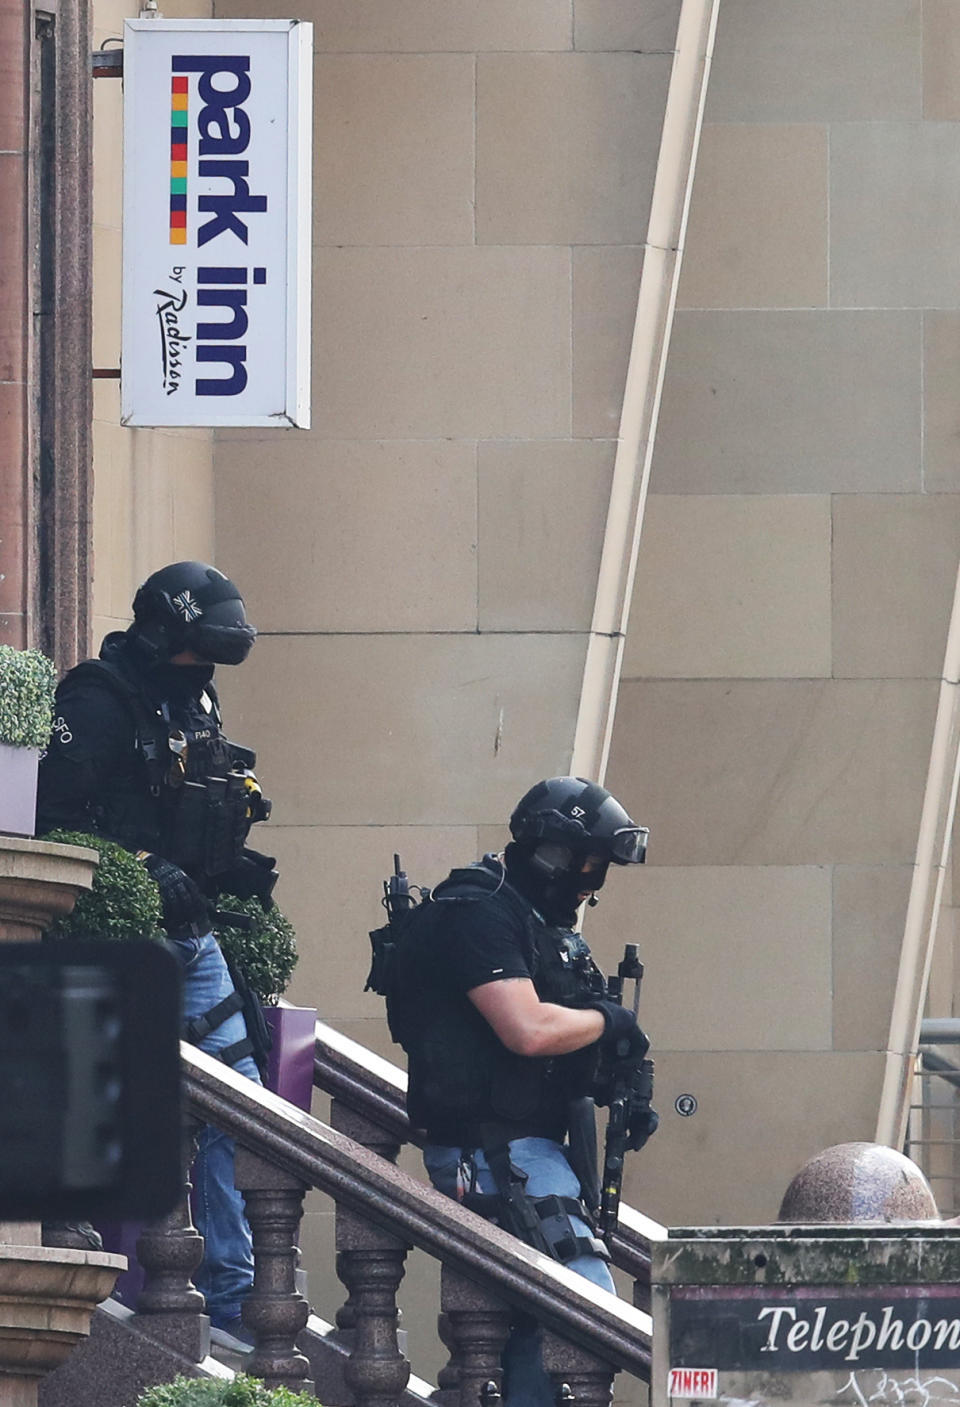 Armed police officers leave the Park Inn hotel in West George Street, Glasgow, after a suspect male was shot by an armed officer. (PA)